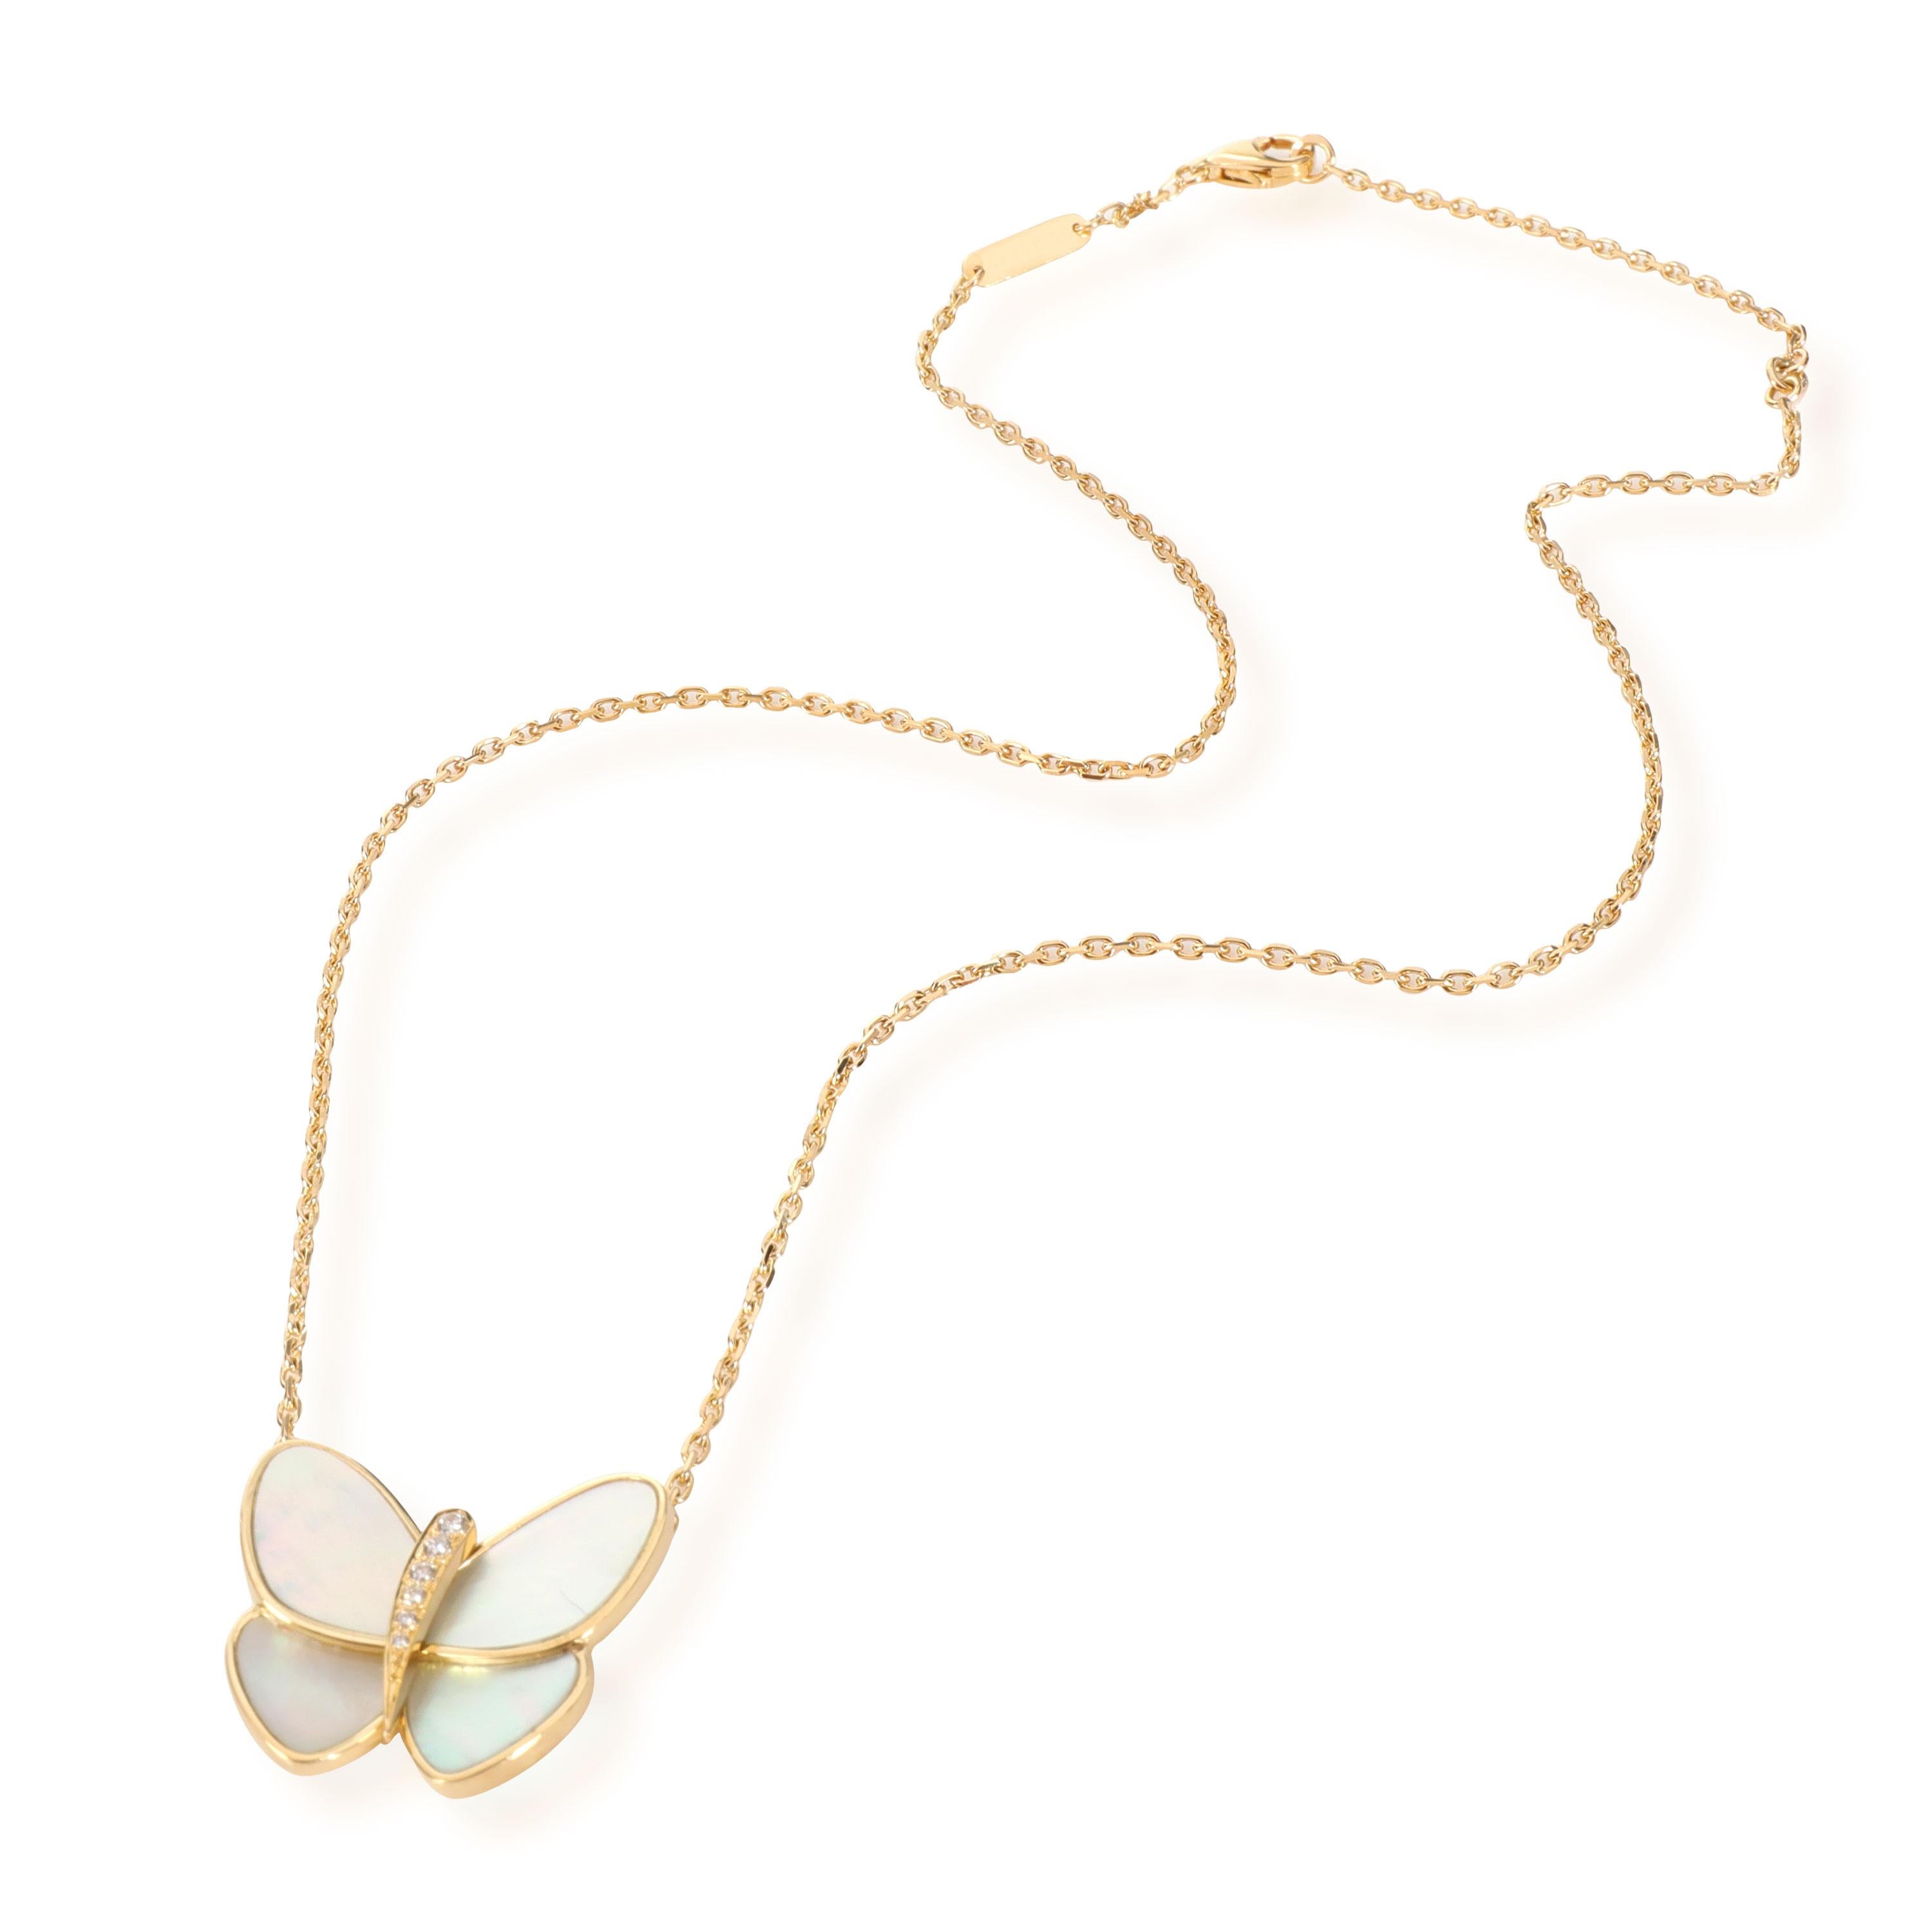 Van Cleef & Arpels Mother of Pearl Diamond Pendant in 18K Yellow Butterfly Gold

PRIMARY DETAILS
SKU: 111569
Listing Title: Van Cleef & Arpels Mother of Pearl Diamond Pendant in 18K Yellow Butterfly Gold
Condition Description: Retails for 8,100 USD.